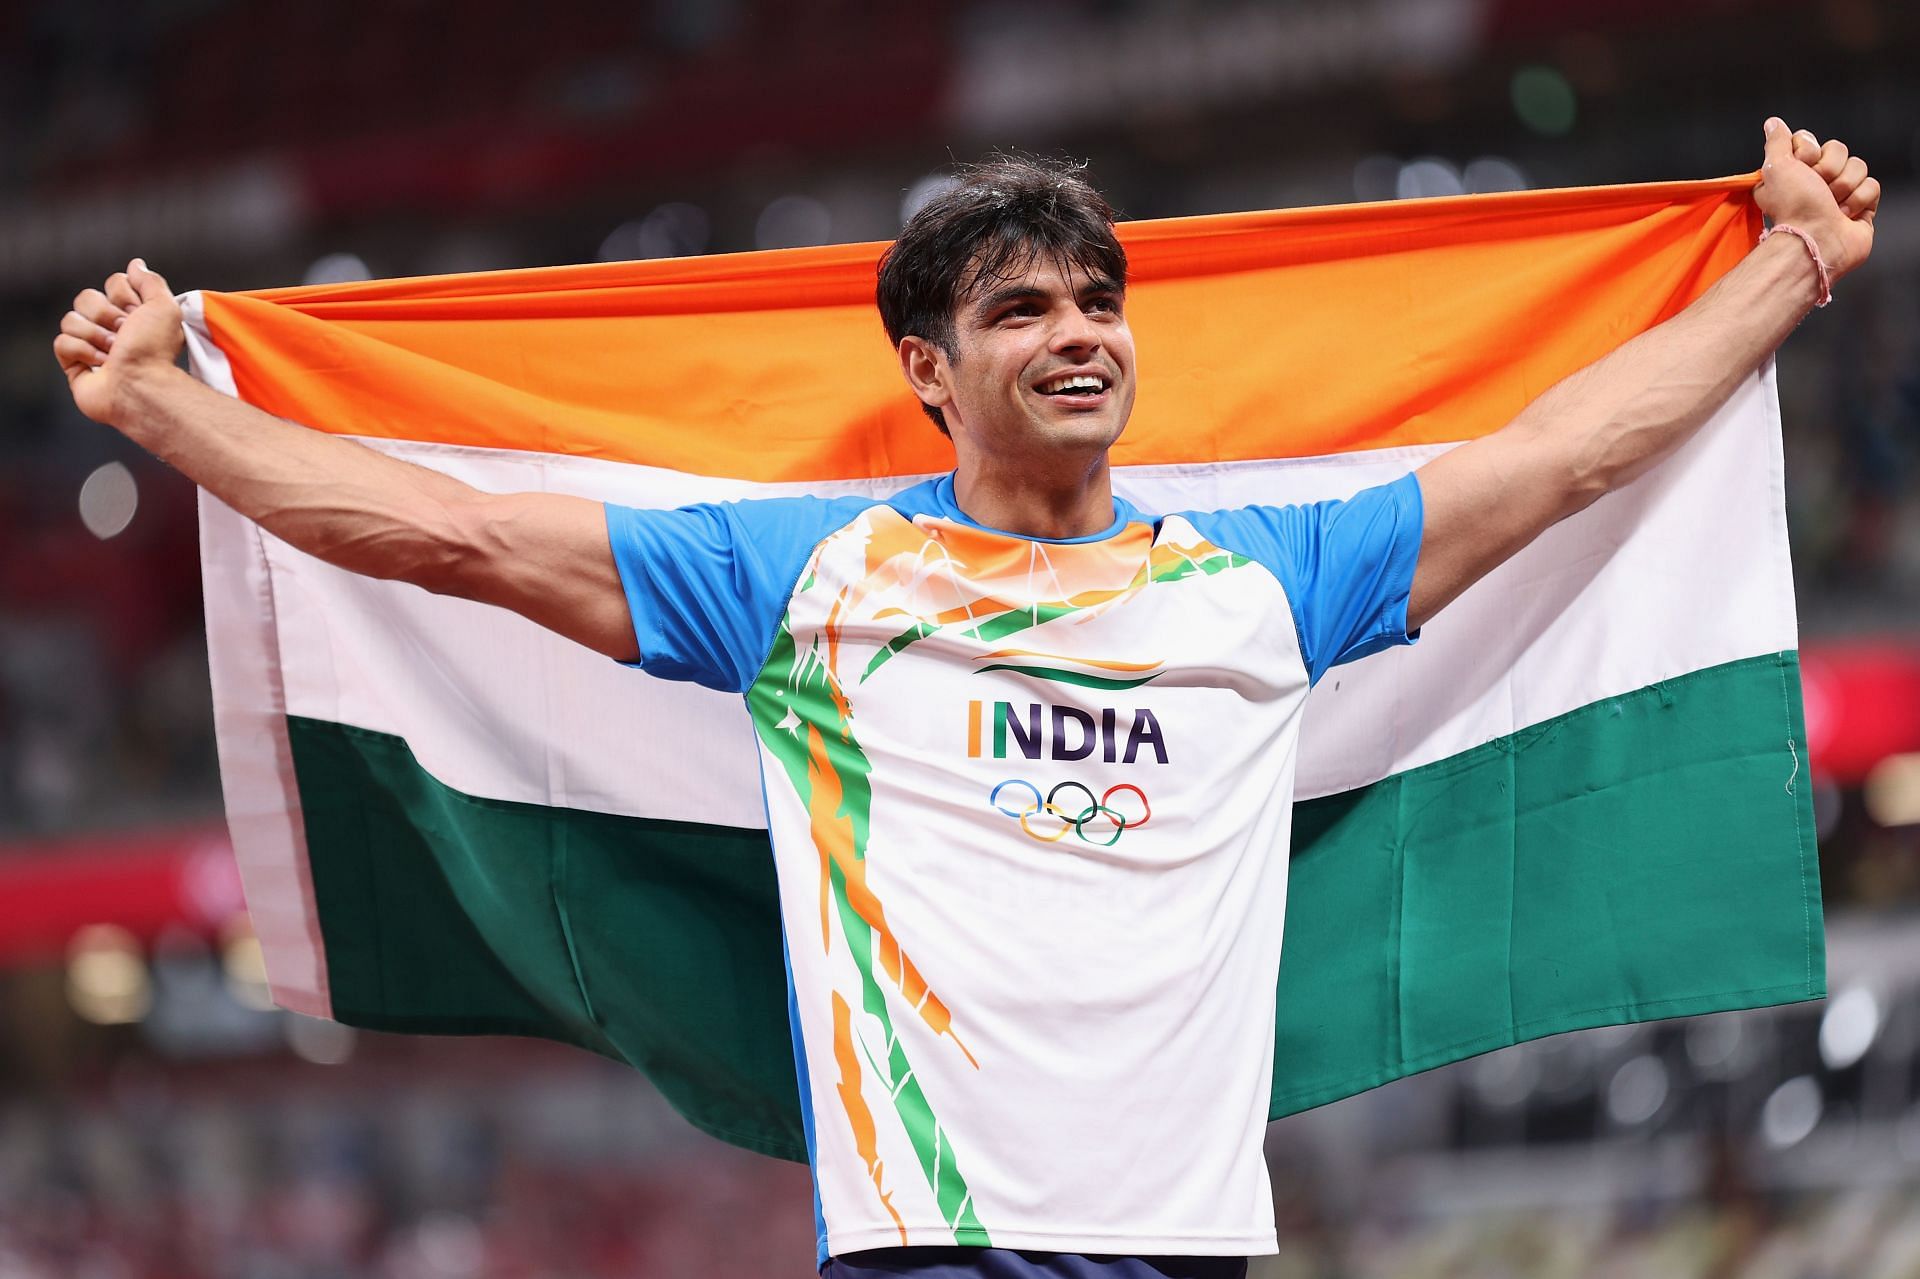 Neeraj Chopra celebrating after winning the gold medal at the Tokyo Olympics